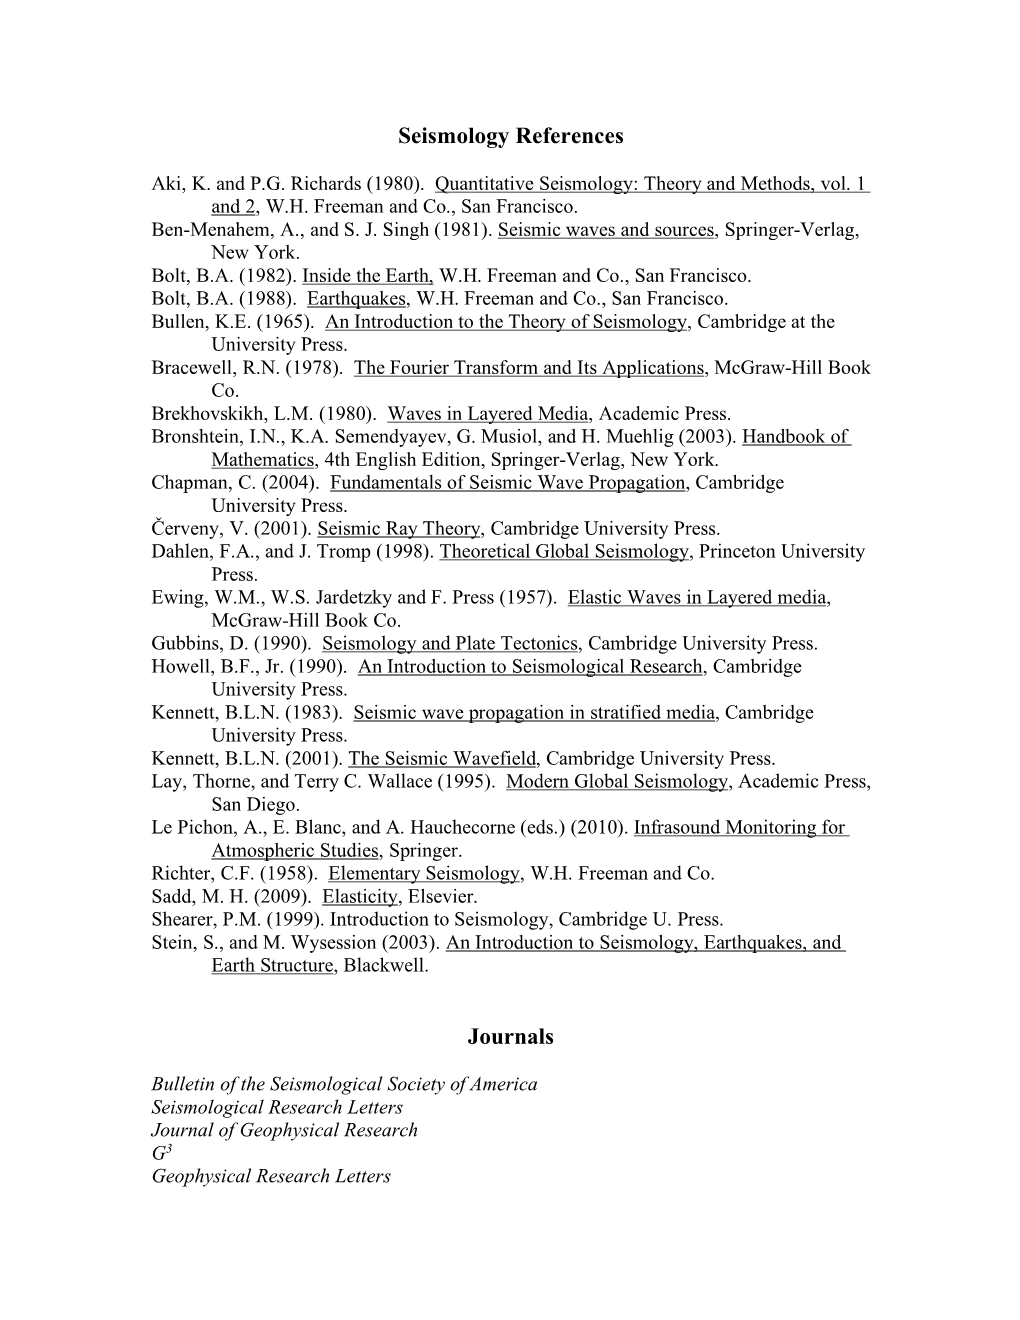 Seismology References Journals